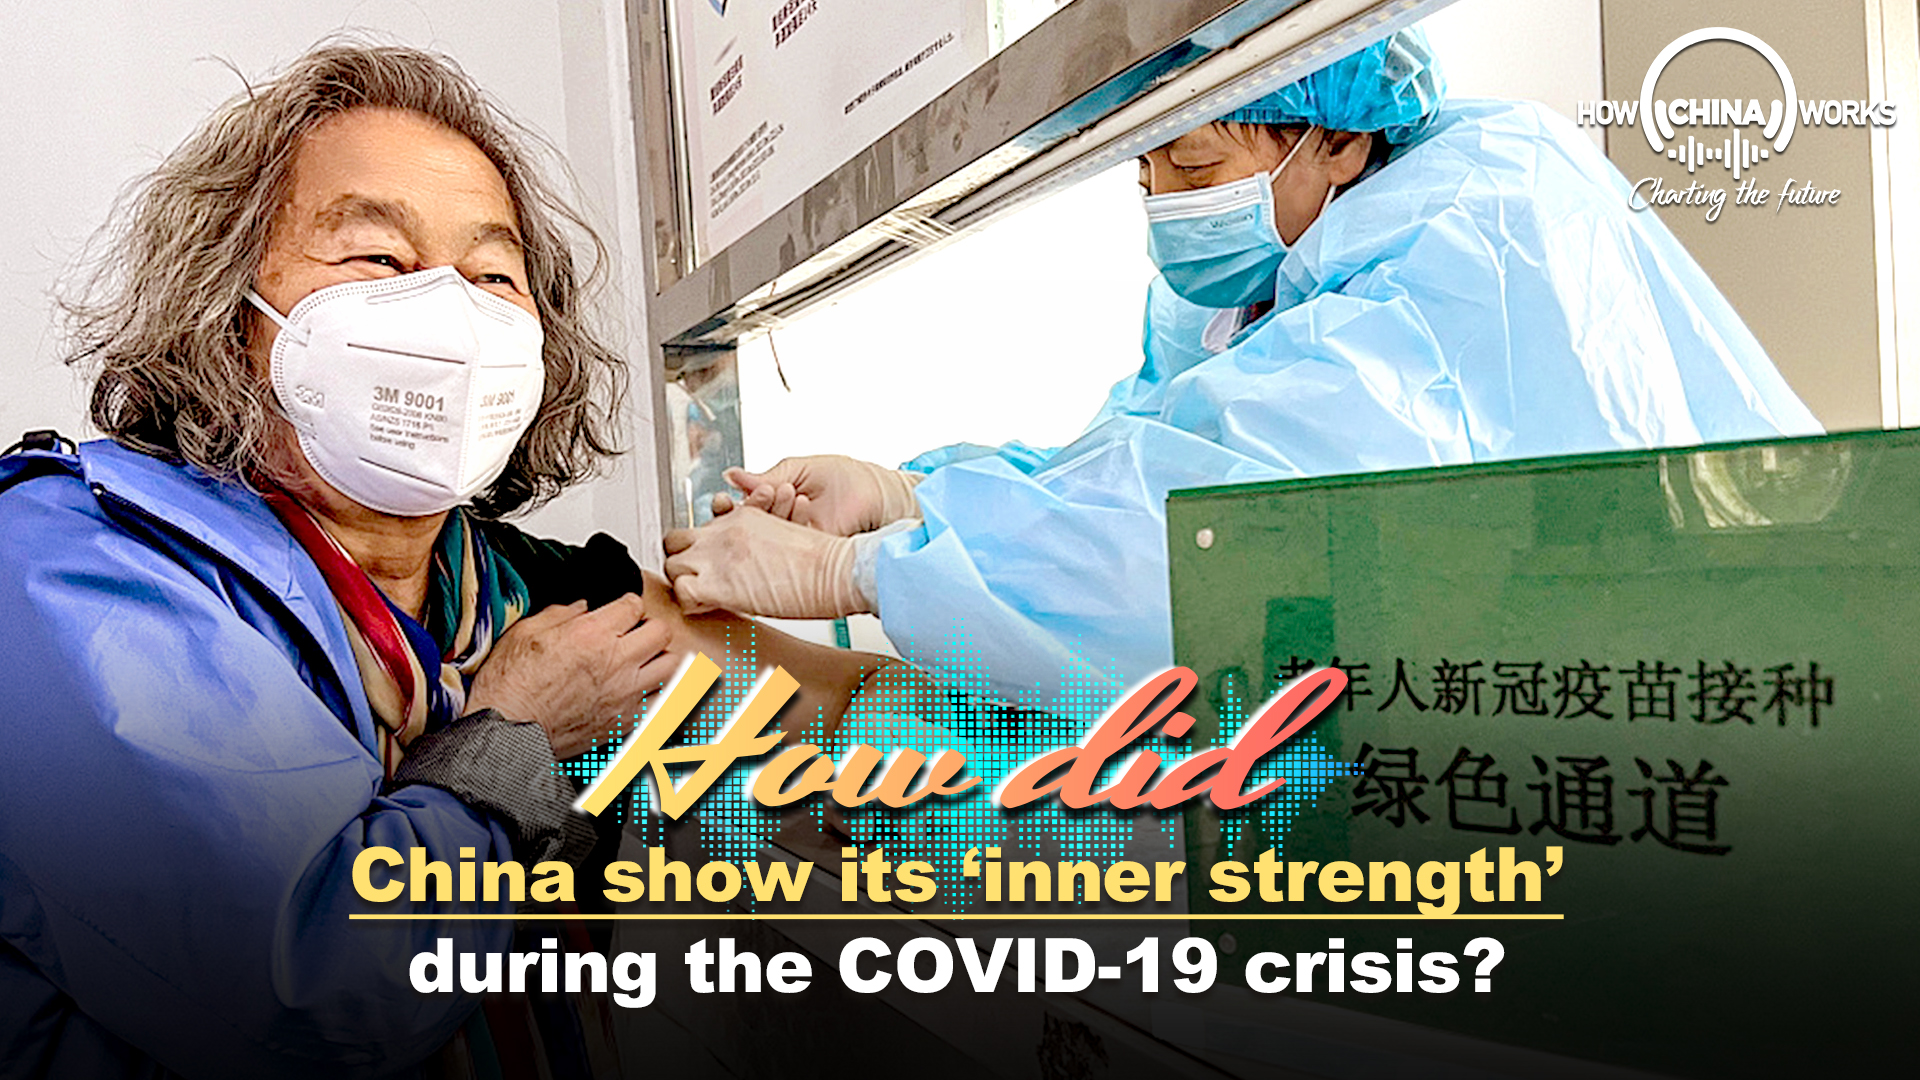 How did China show its 'inner strength' during the COVID-19 crisis?